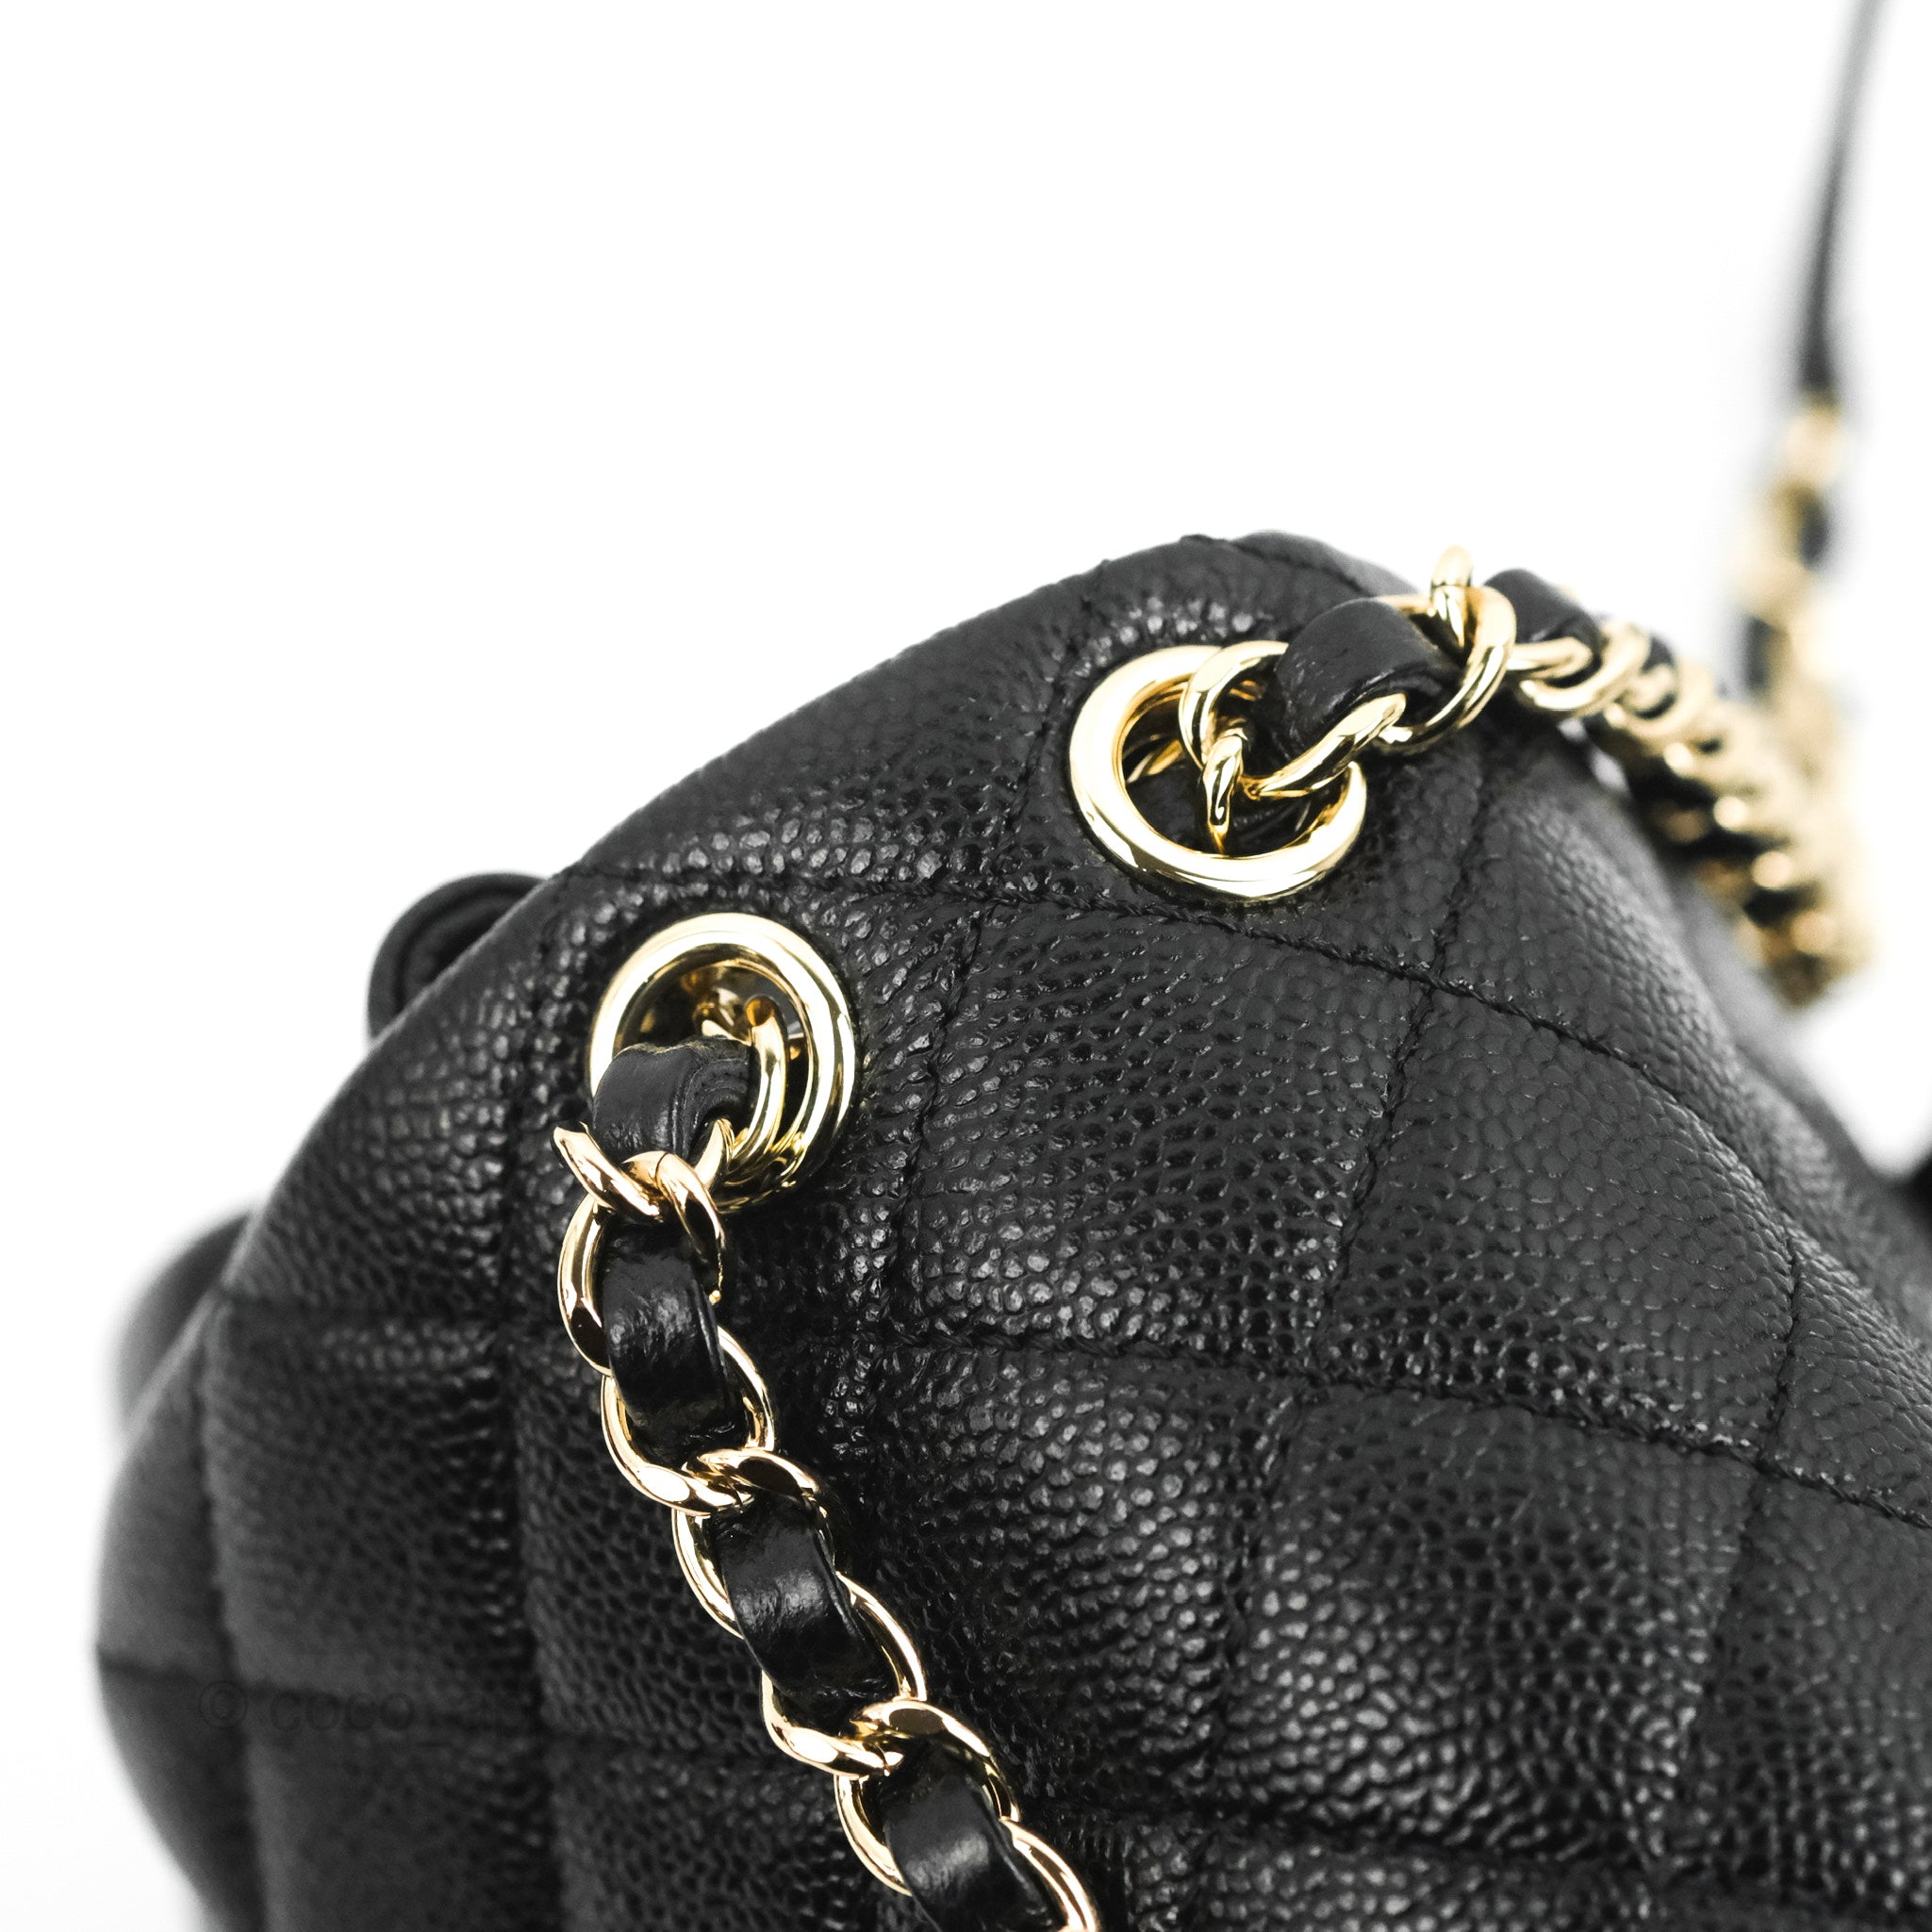 NWT 23S Chanel Classic Backpack Black Caviar with Gold Hardware